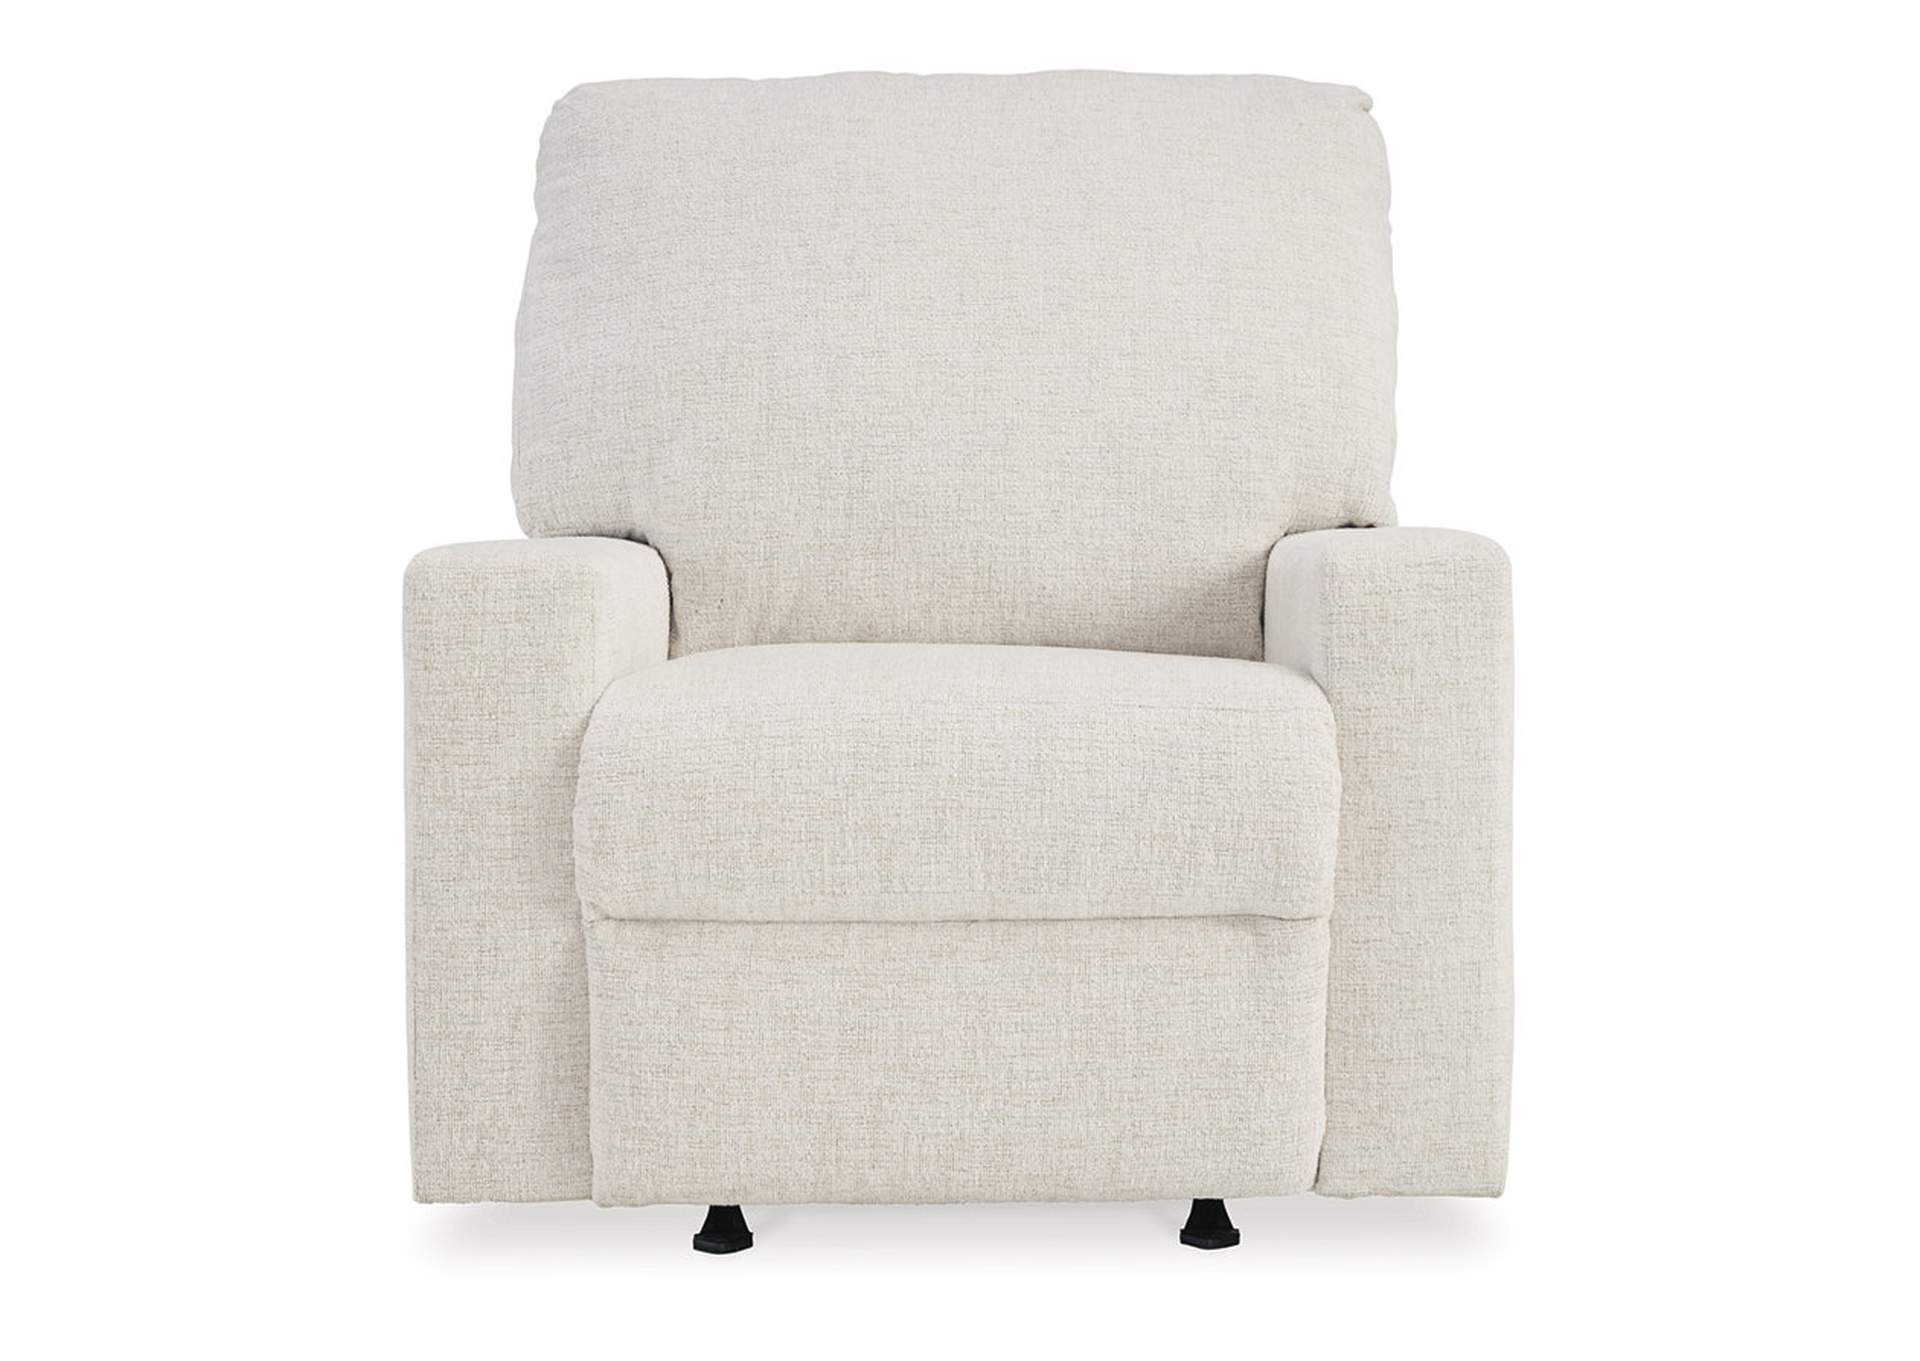 Rannis Recliner,Signature Design By Ashley